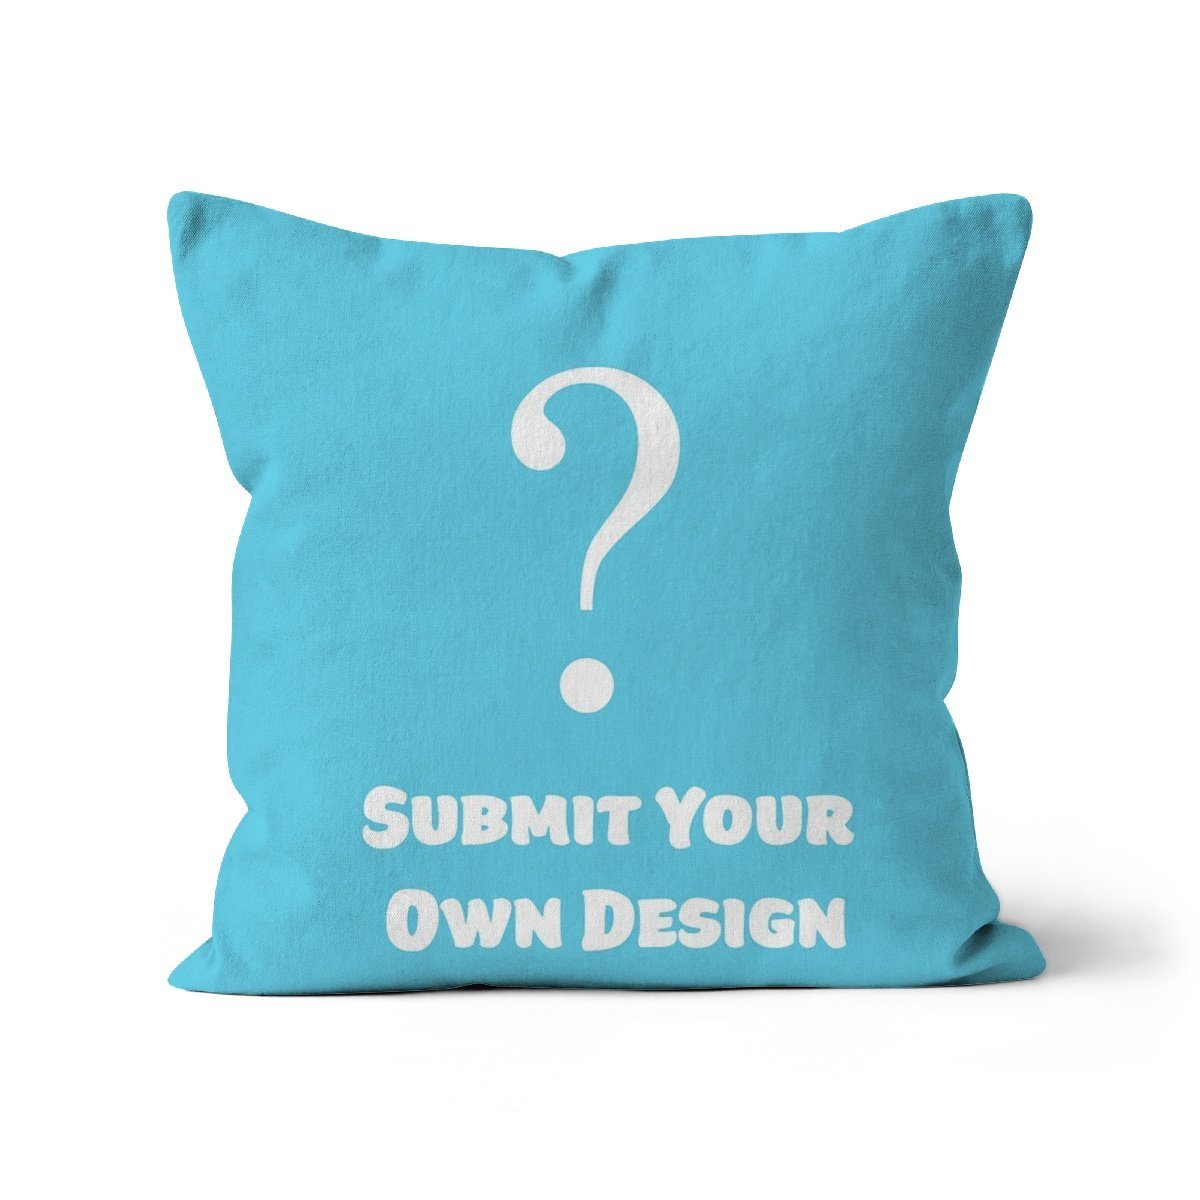 Submit Your Own Design: Custom Pet Throw Pillow - Paw & Glory - #pet portraits# - #dog portraits# - #pet portraits uk#pawandglory, pet art pillow,pet custom pillow, personalised dog pillows, dog pillow cases, pillow with dogs face, pillow custom, dog photo on pillow